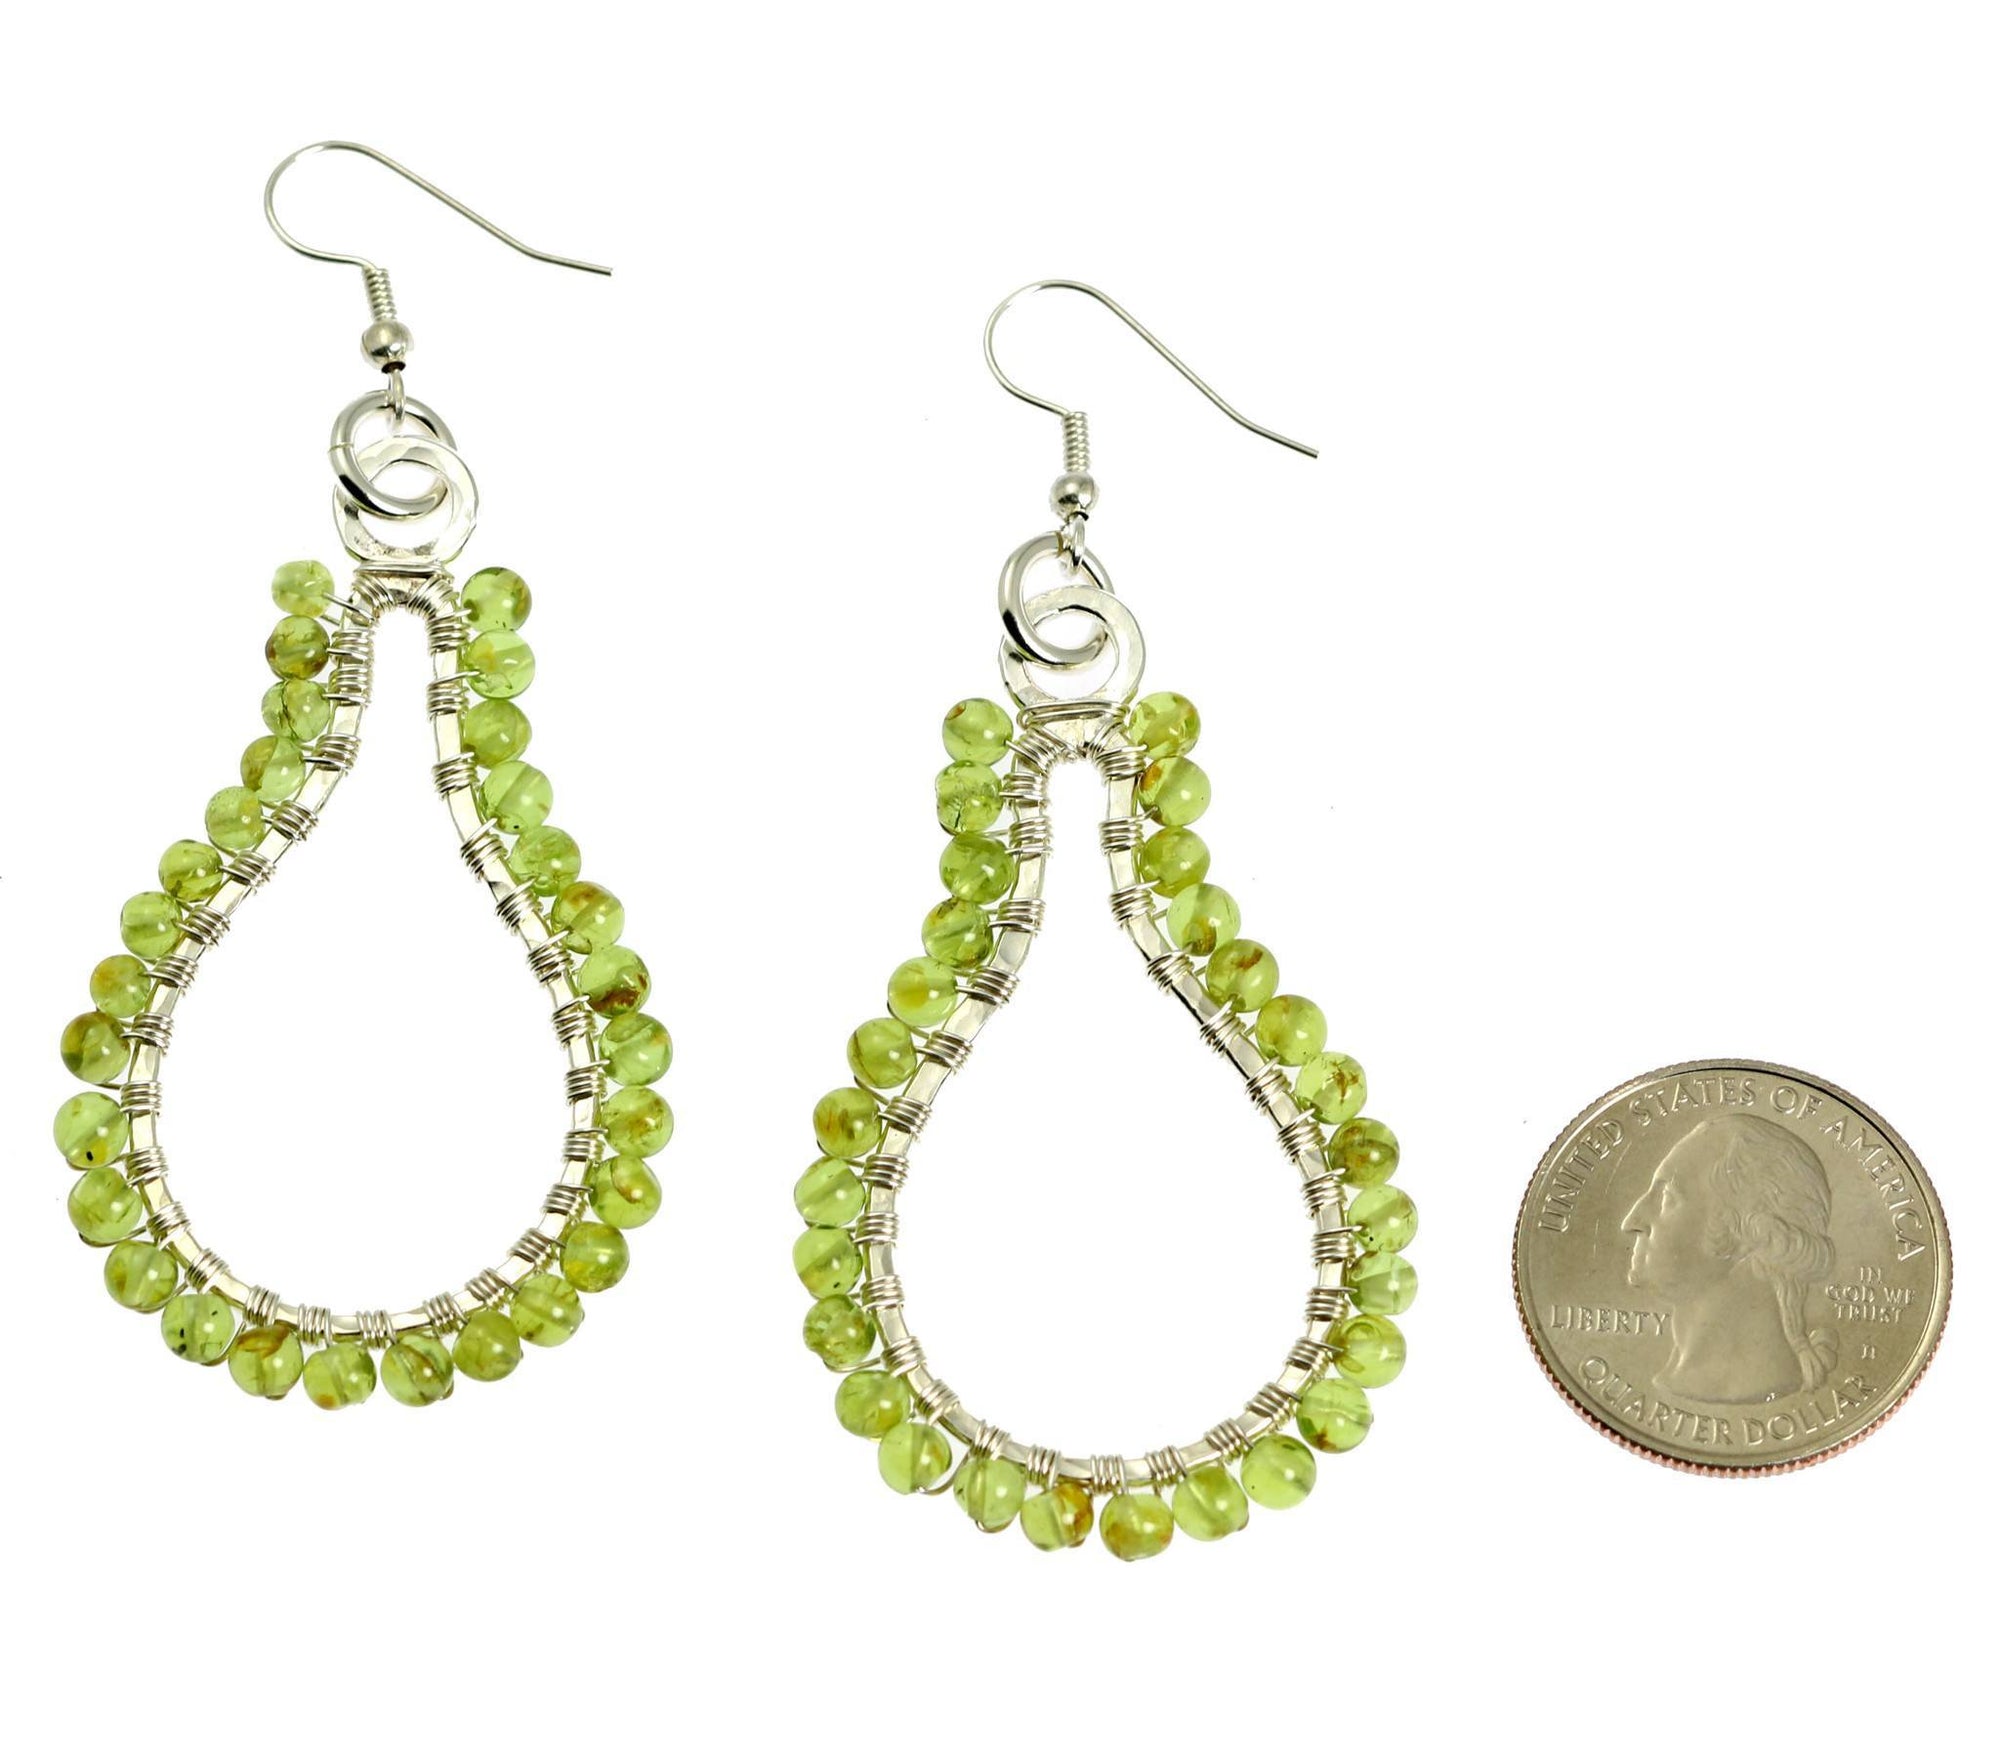 Size of Hammered Silver Drop Earrings with Peridot